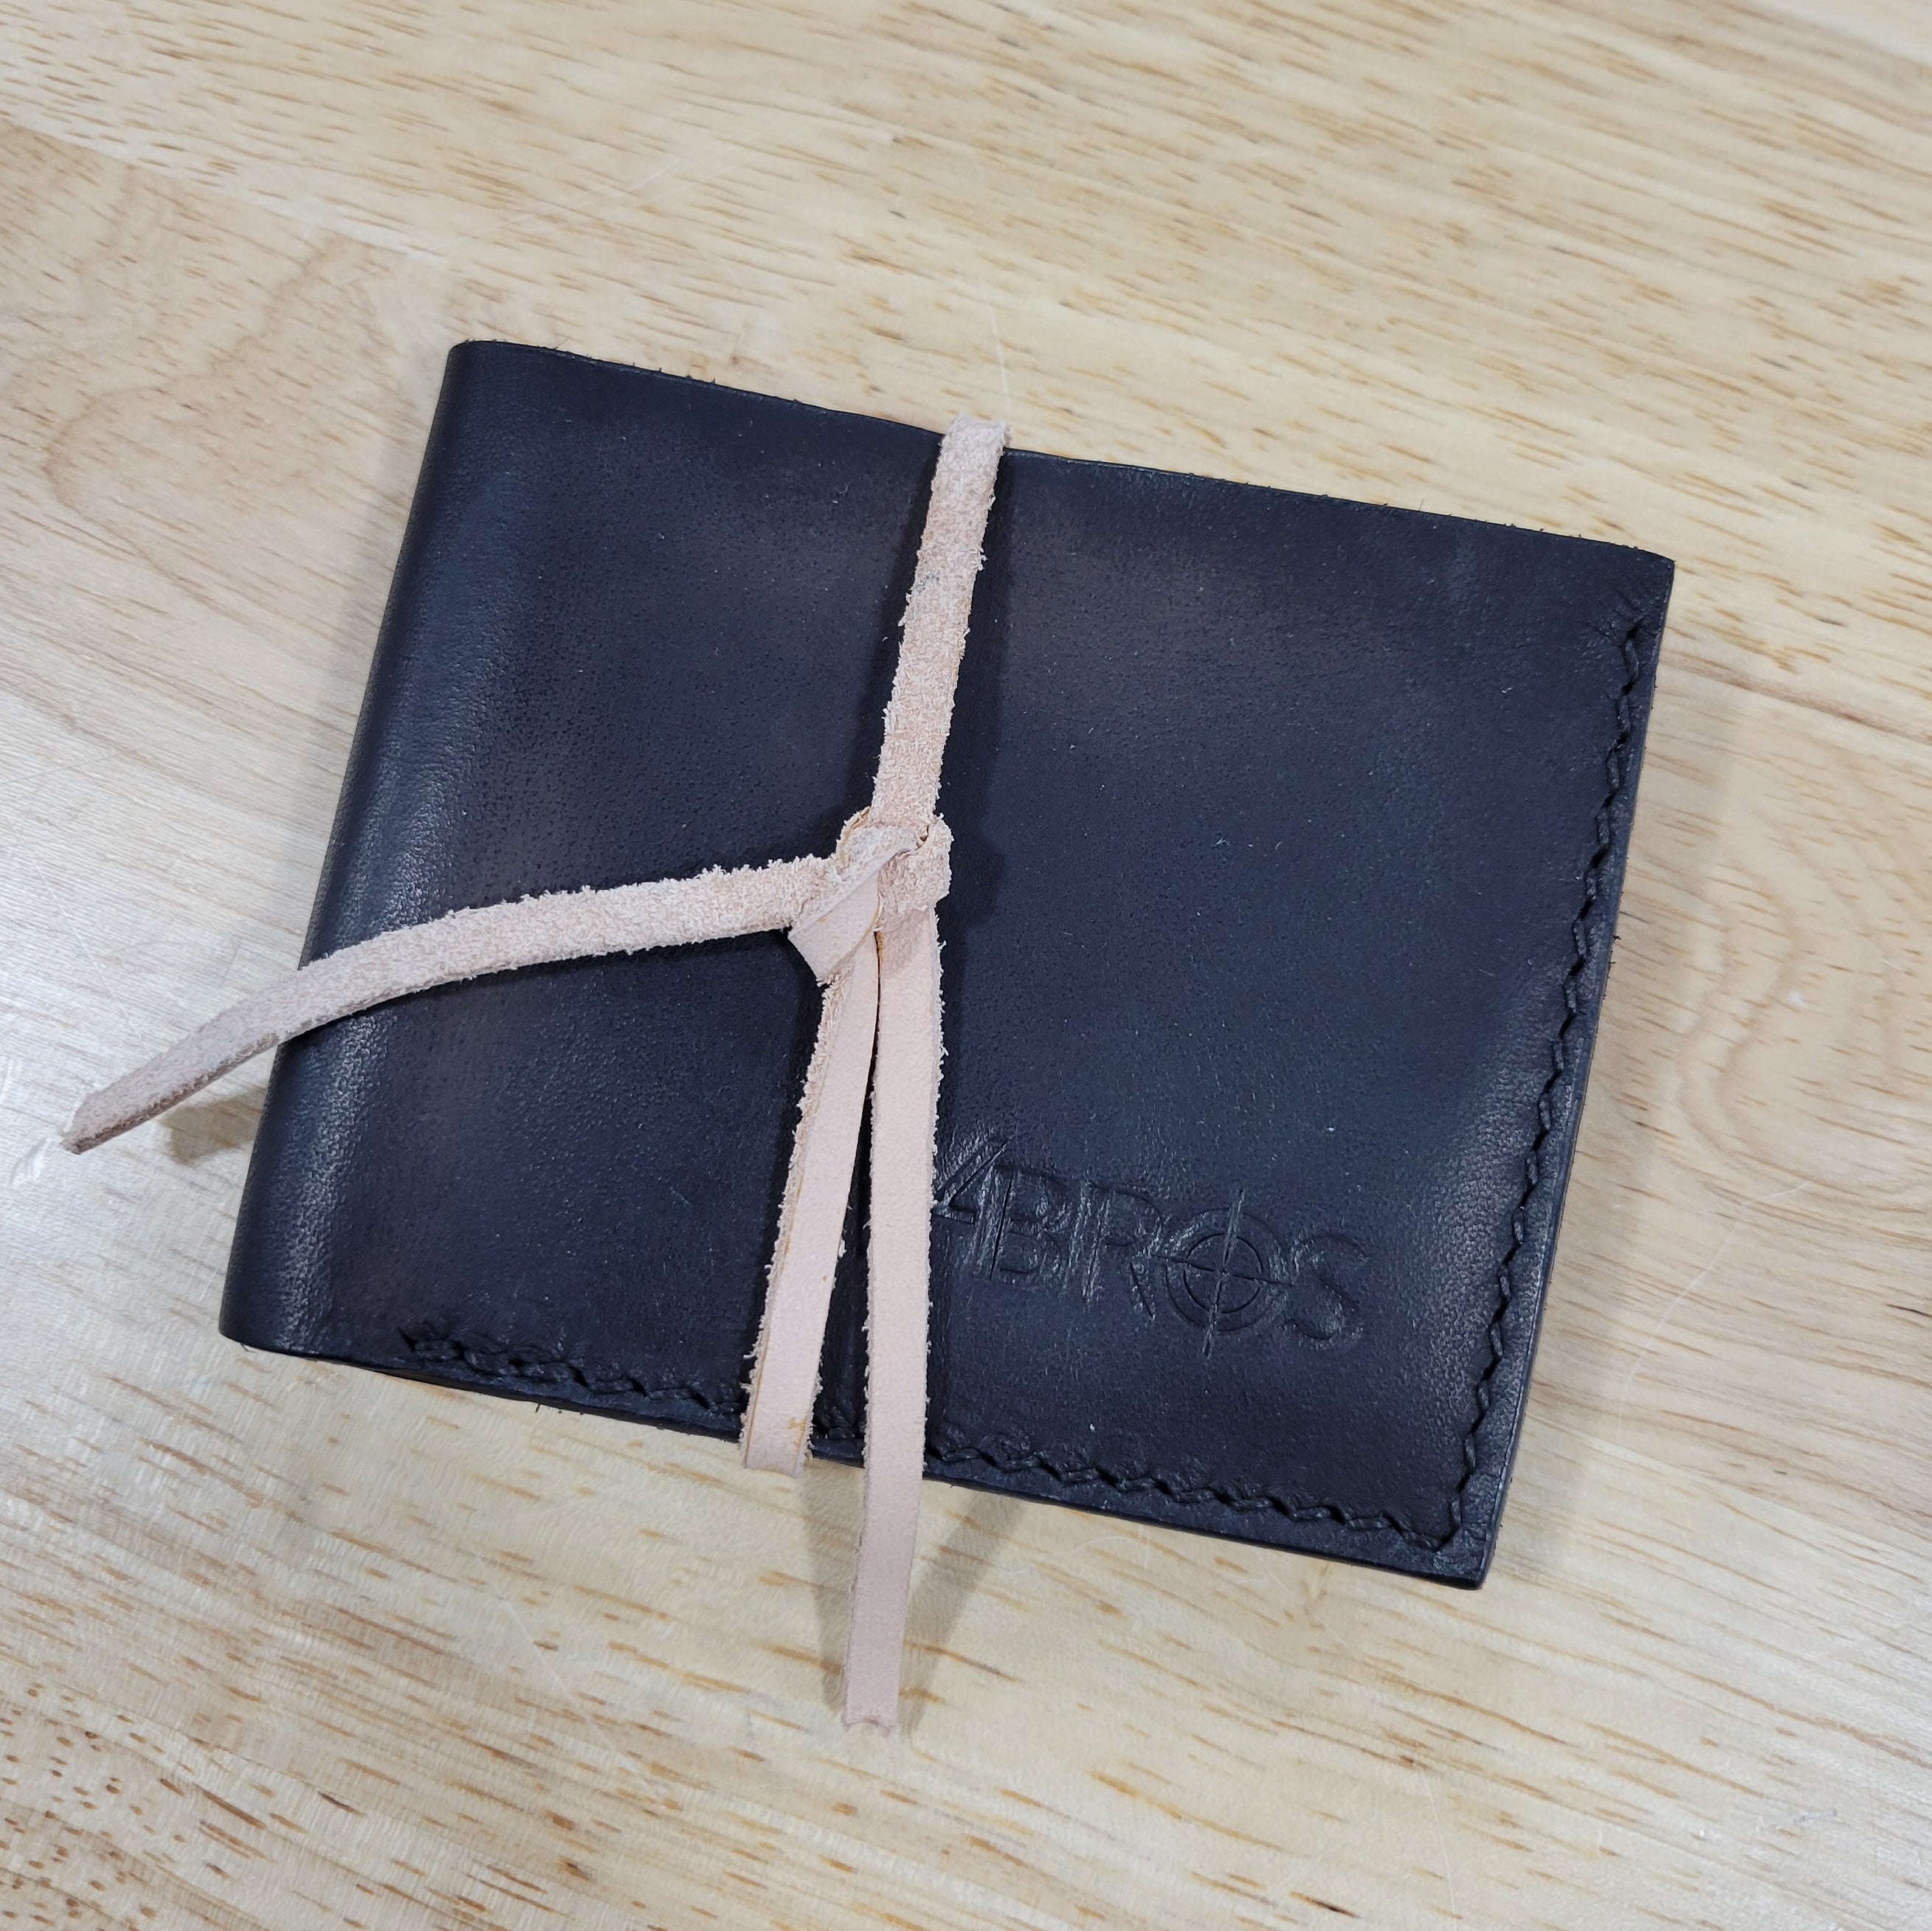 Our 4Bros Wallet is 100% hand-made in Cass County, Indiana. The single-fold design has four pockets on each side, three sized for credit cards, and one hidden pocket behind the card pockets.  We use 5-6 ounce leather for the exterior and goat skin for the interior to keep the weight and thickness to a minimum.